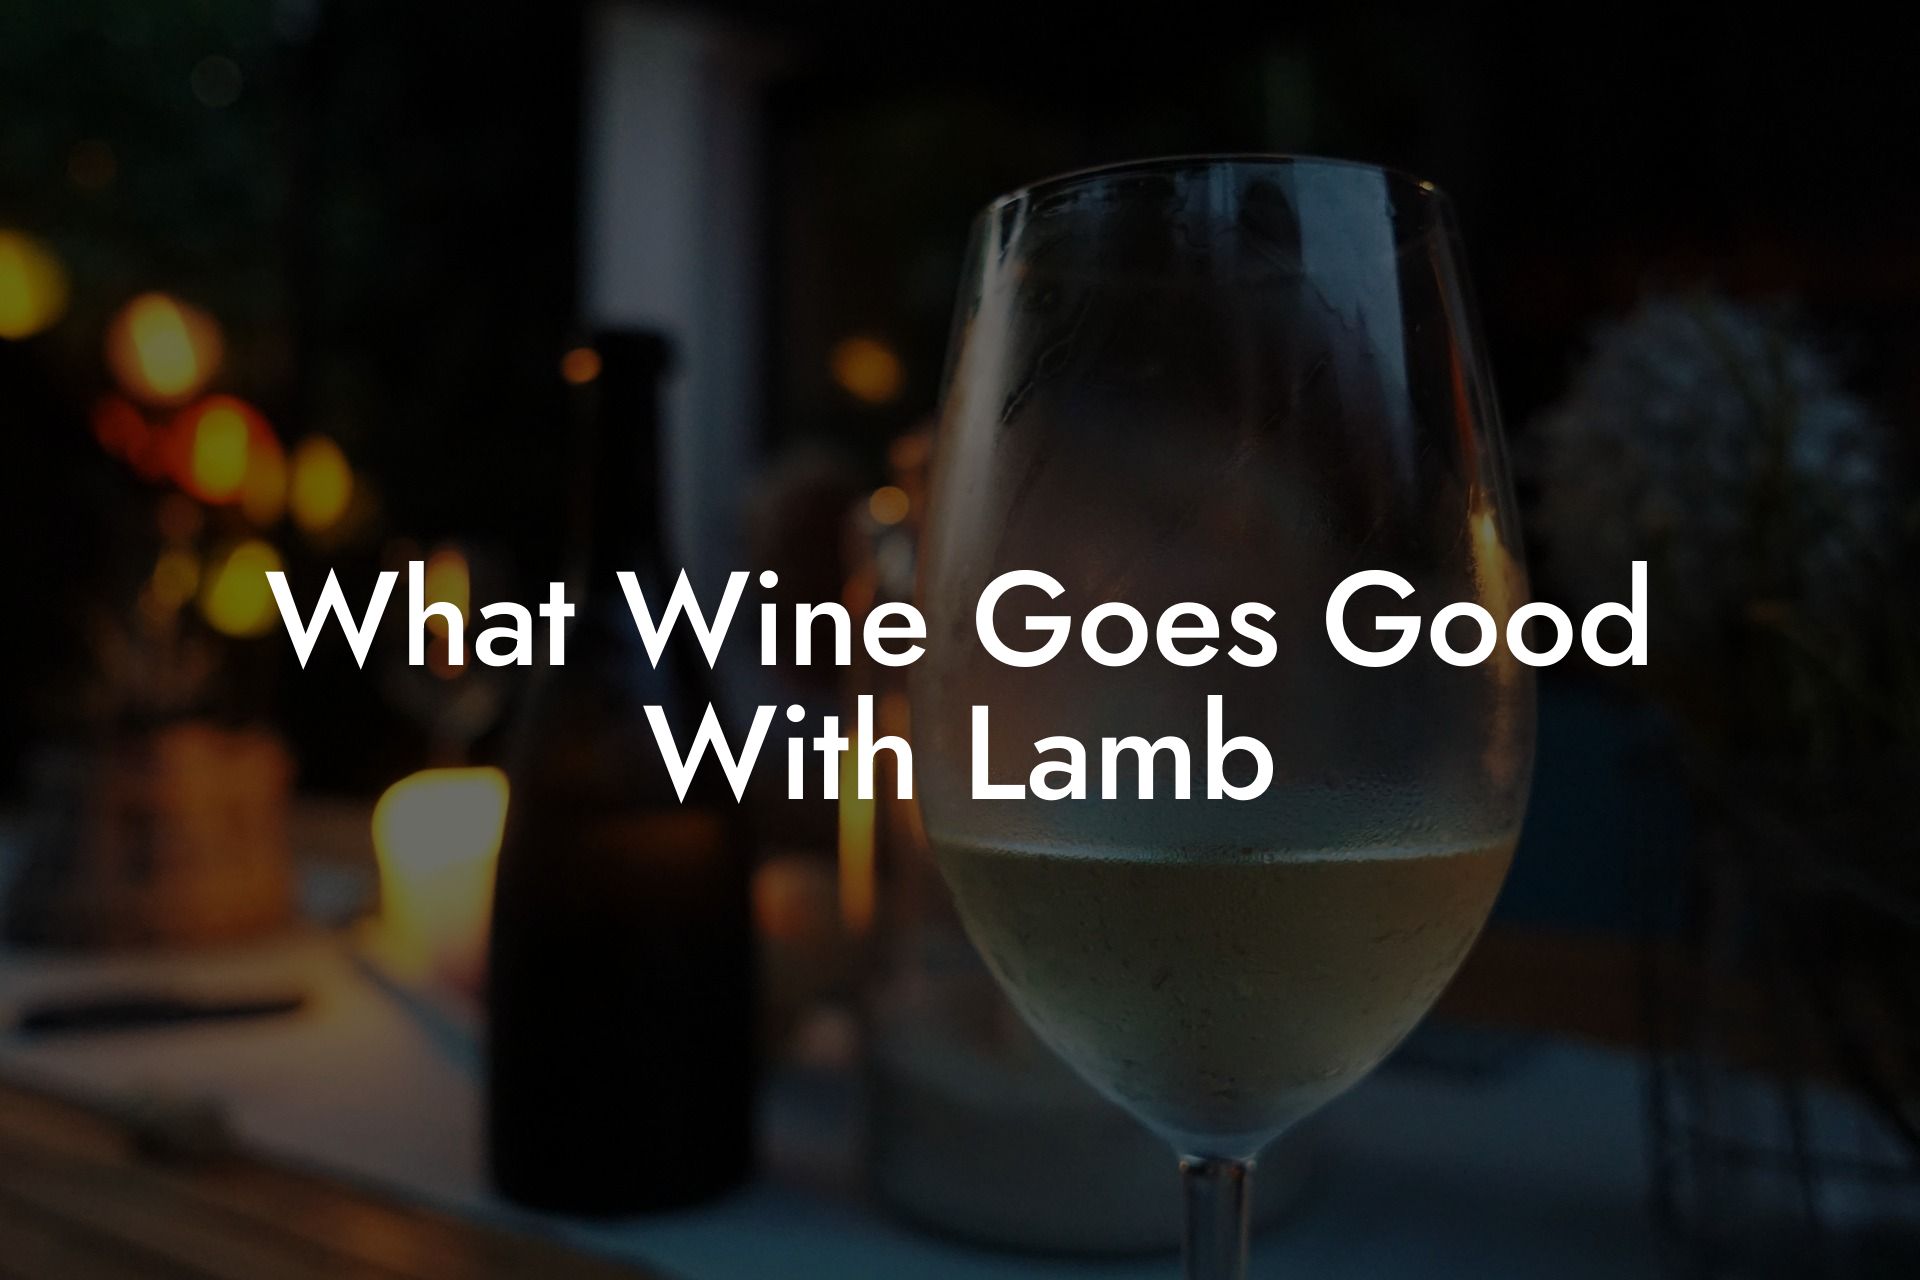 What Wine Goes Good With Lamb